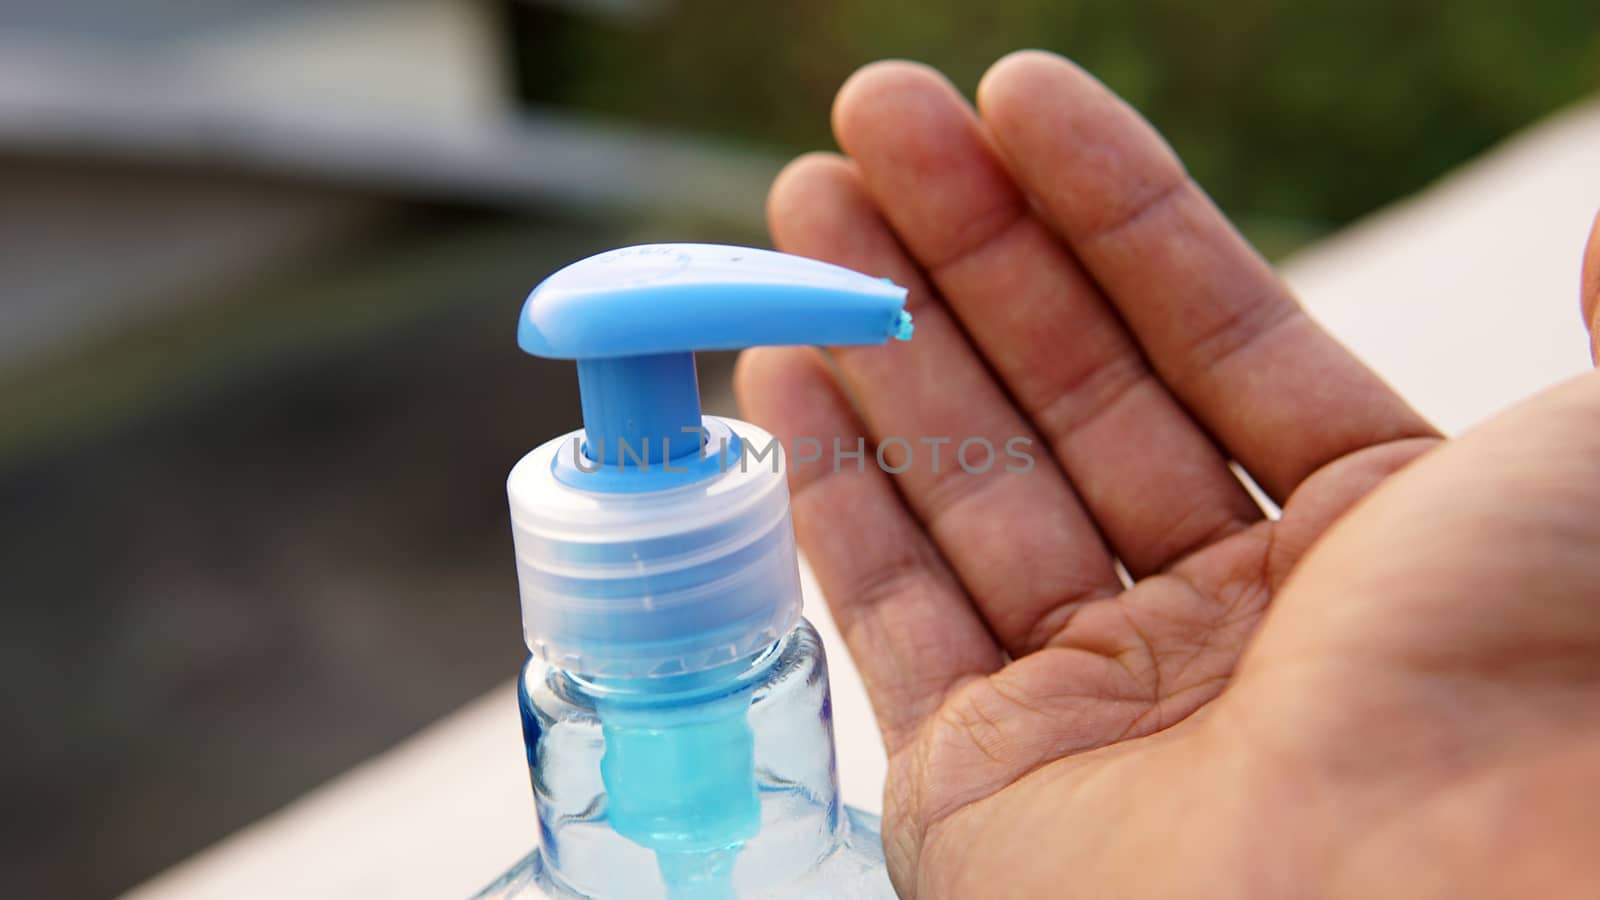 Washing hands with alcohol based gel from a hand pump bottle to protect against corona virus or Covid-19.